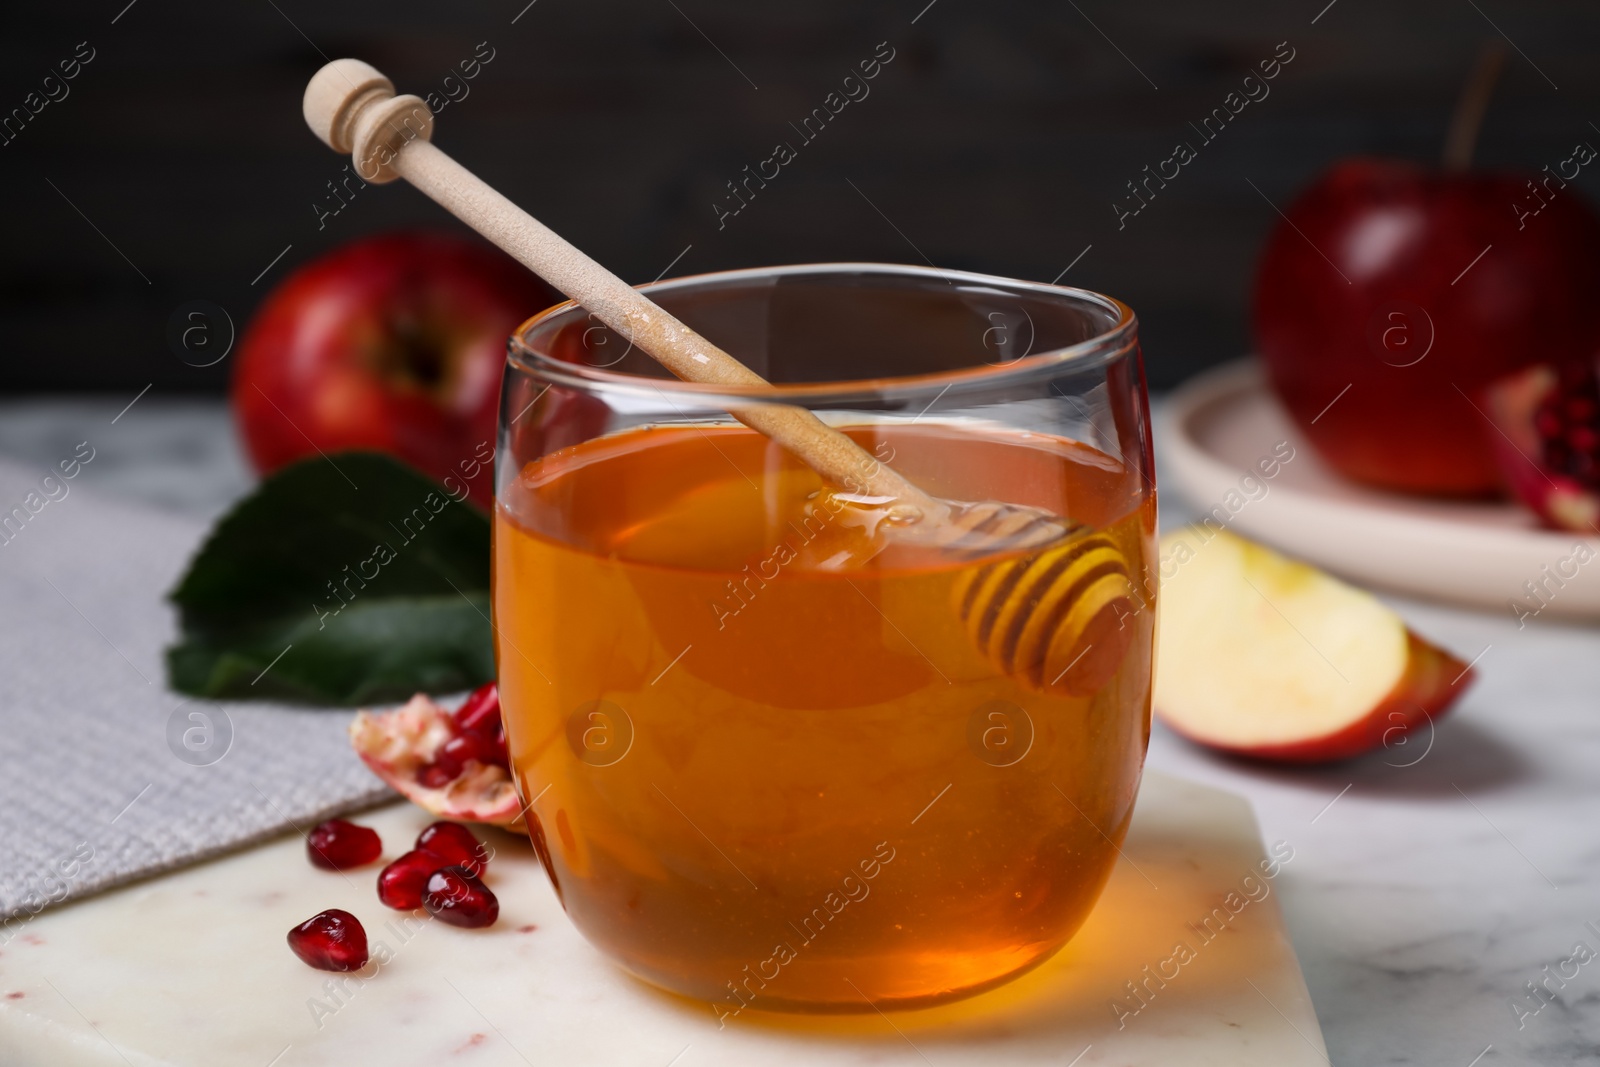 Photo of Honey, apples and pomegranate seeds on white marble table. Rosh Hashanah holiday